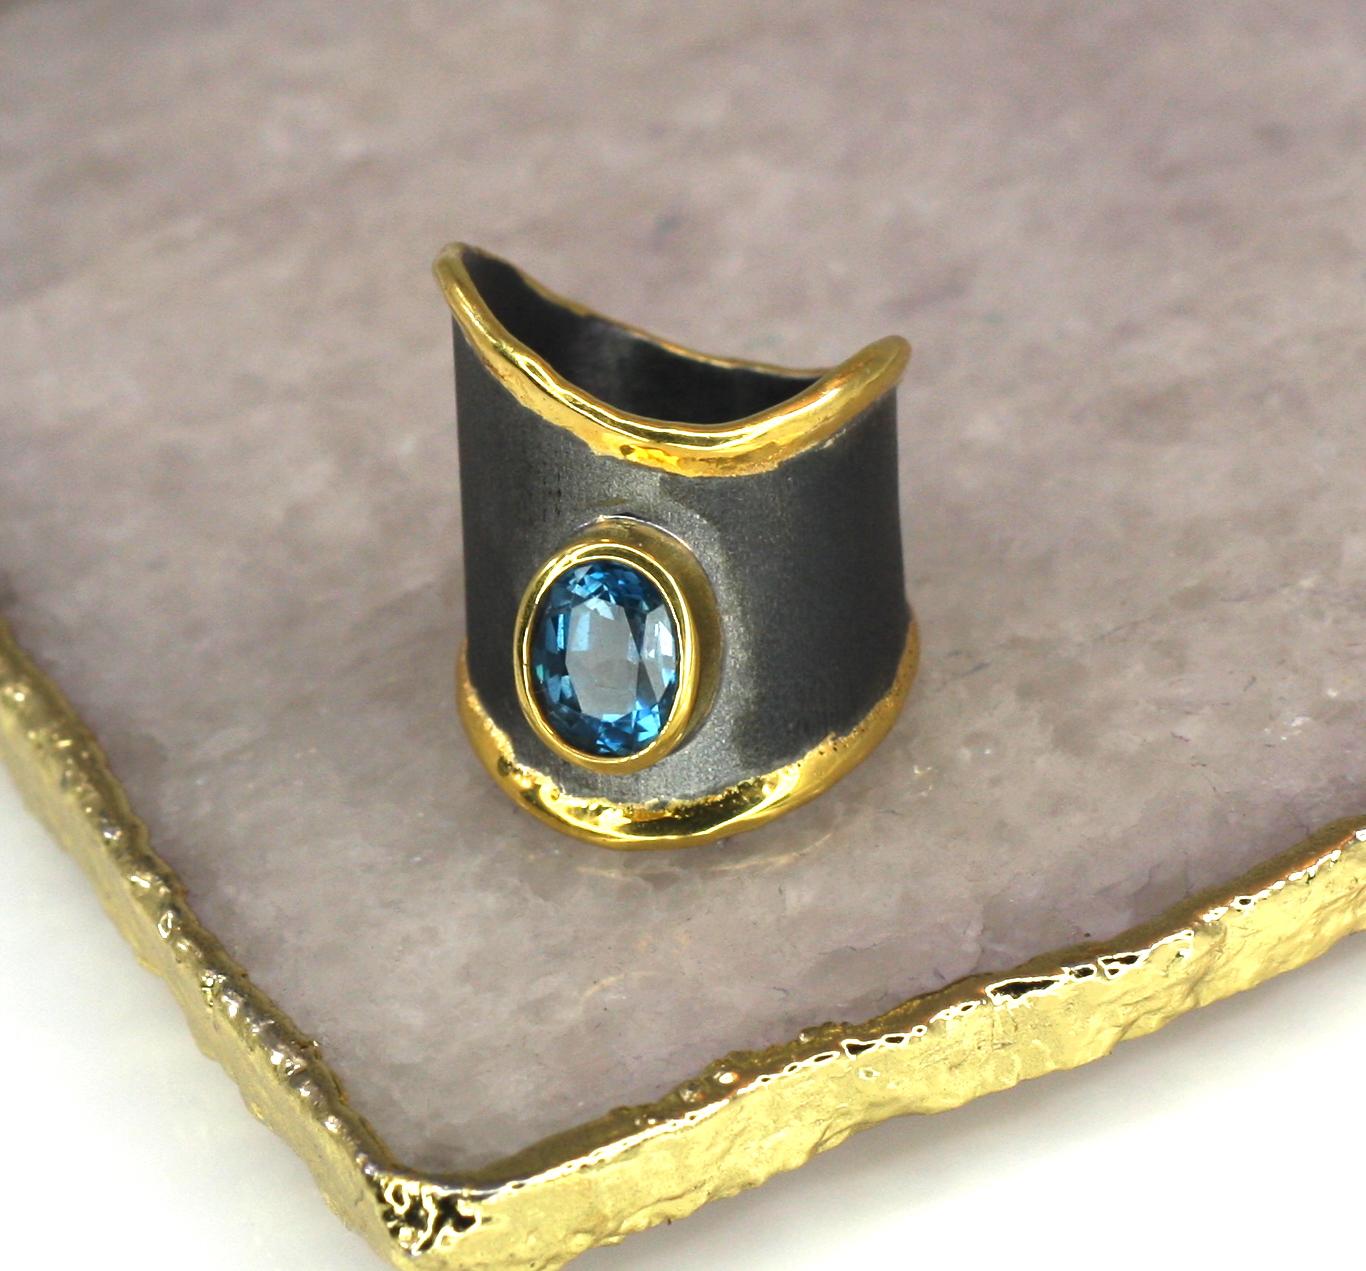 Introducing Yianni Creations Eclyps Collection handmade artisan ring from fine silver 950 purity. The brushed surface is plated with Black Rhodium and the liquid edges decorated with a thick overlay of 24 Karat yellow gold. The ring features a 1.60